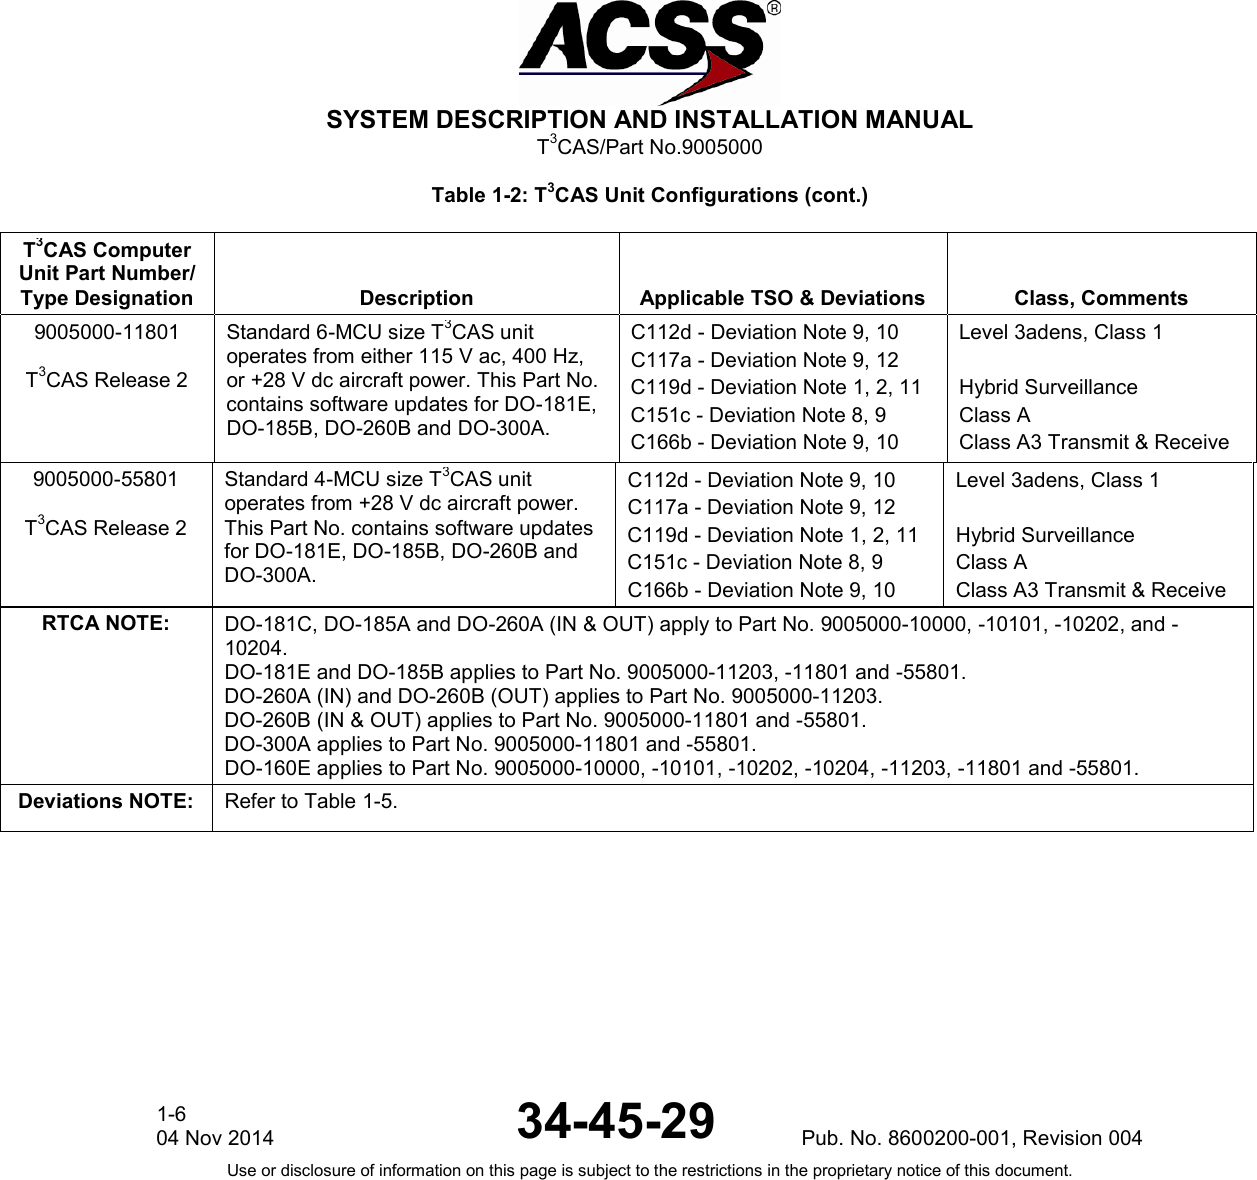  SYSTEM DESCRIPTION AND INSTALLATION MANUAL T3CAS/Part No.9005000 Table 1-2: T3CAS Unit Configurations (cont.) T3CAS Computer Unit Part Number/ Type Designation Description Applicable TSO &amp; Deviations Class, Comments 9005000-11801  T3CAS Release 2 Standard 6-MCU size T3CAS unit operates from either 115 V ac, 400 Hz, or +28 V dc aircraft power. This Part No. contains software updates for DO-181E, DO-185B, DO-260B and DO-300A. C112d - Deviation Note 9, 10 C117a - Deviation Note 9, 12 C119d - Deviation Note 1, 2, 11 C151c - Deviation Note 8, 9 C166b - Deviation Note 9, 10 Level 3adens, Class 1  Hybrid Surveillance Class A Class A3 Transmit &amp; Receive 9005000-55801  T3CAS Release 2 Standard 4-MCU size T3CAS unit operates from +28 V dc aircraft power. This Part No. contains software updates for DO-181E, DO-185B, DO-260B and DO-300A. C112d - Deviation Note 9, 10 C117a - Deviation Note 9, 12 C119d - Deviation Note 1, 2, 11 C151c - Deviation Note 8, 9 C166b - Deviation Note 9, 10 Level 3adens, Class 1  Hybrid Surveillance Class A Class A3 Transmit &amp; Receive RTCA NOTE: DO-181C, DO-185A and DO-260A (IN &amp; OUT) apply to Part No. 9005000-10000, -10101, -10202, and -10204. DO-181E and DO-185B applies to Part No. 9005000-11203, -11801 and -55801. DO-260A (IN) and DO-260B (OUT) applies to Part No. 9005000-11203. DO-260B (IN &amp; OUT) applies to Part No. 9005000-11801 and -55801. DO-300A applies to Part No. 9005000-11801 and -55801. DO-160E applies to Part No. 9005000-10000, -10101, -10202, -10204, -11203, -11801 and -55801. Deviations NOTE: Refer to Table 1-5.    1-6 04 Nov 2014 34-45-29 Pub. No. 8600200-001, Revision 004 Use or disclosure of information on this page is subject to the restrictions in the proprietary notice of this document.  